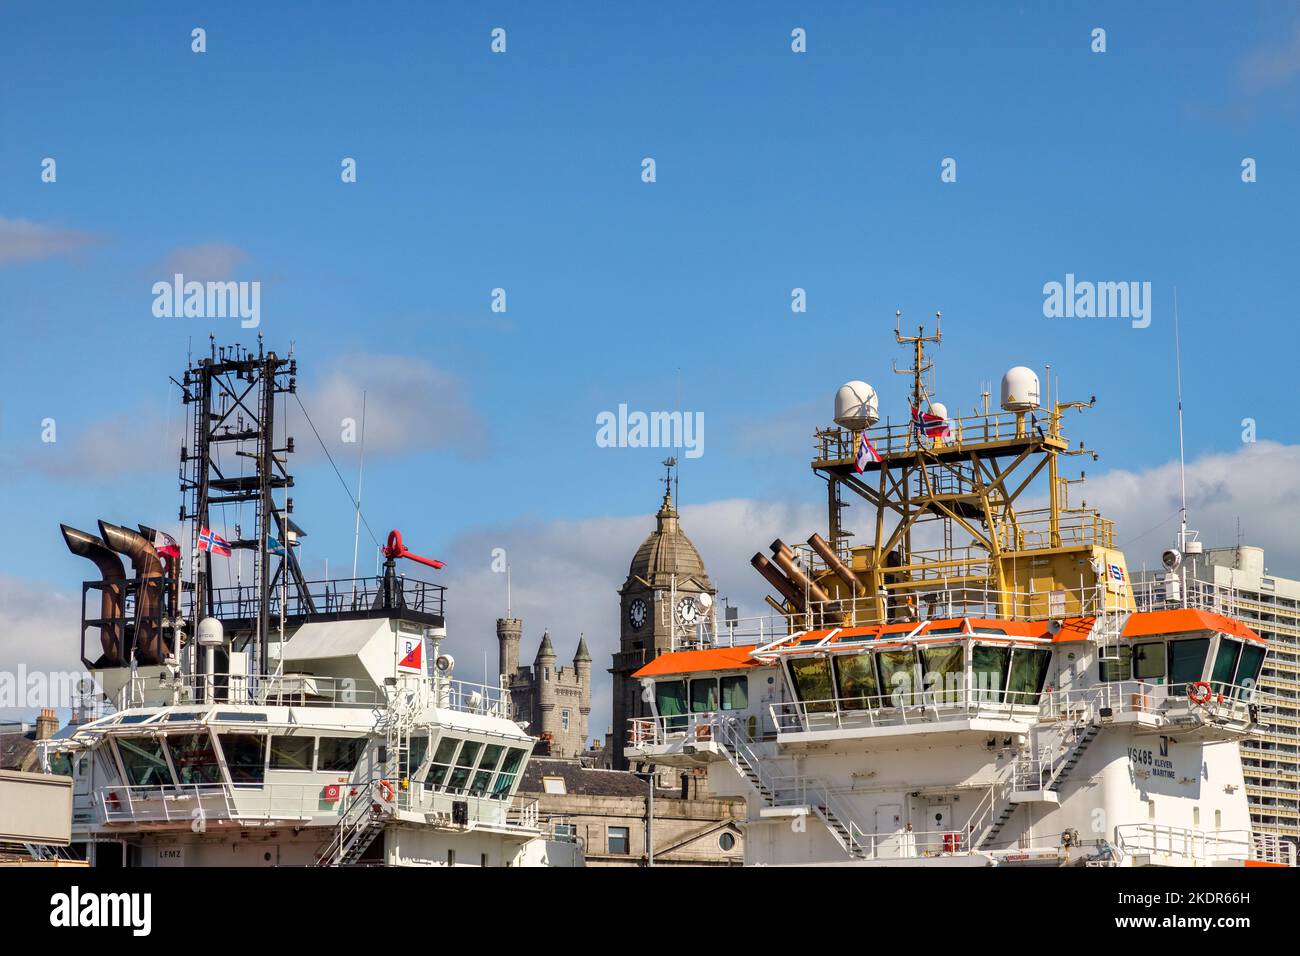 13 September 2022: Aberdeen, Scotland - Ancient and modern in one picture, Oil industry support ships and Victorian granite buildings. Stock Photo